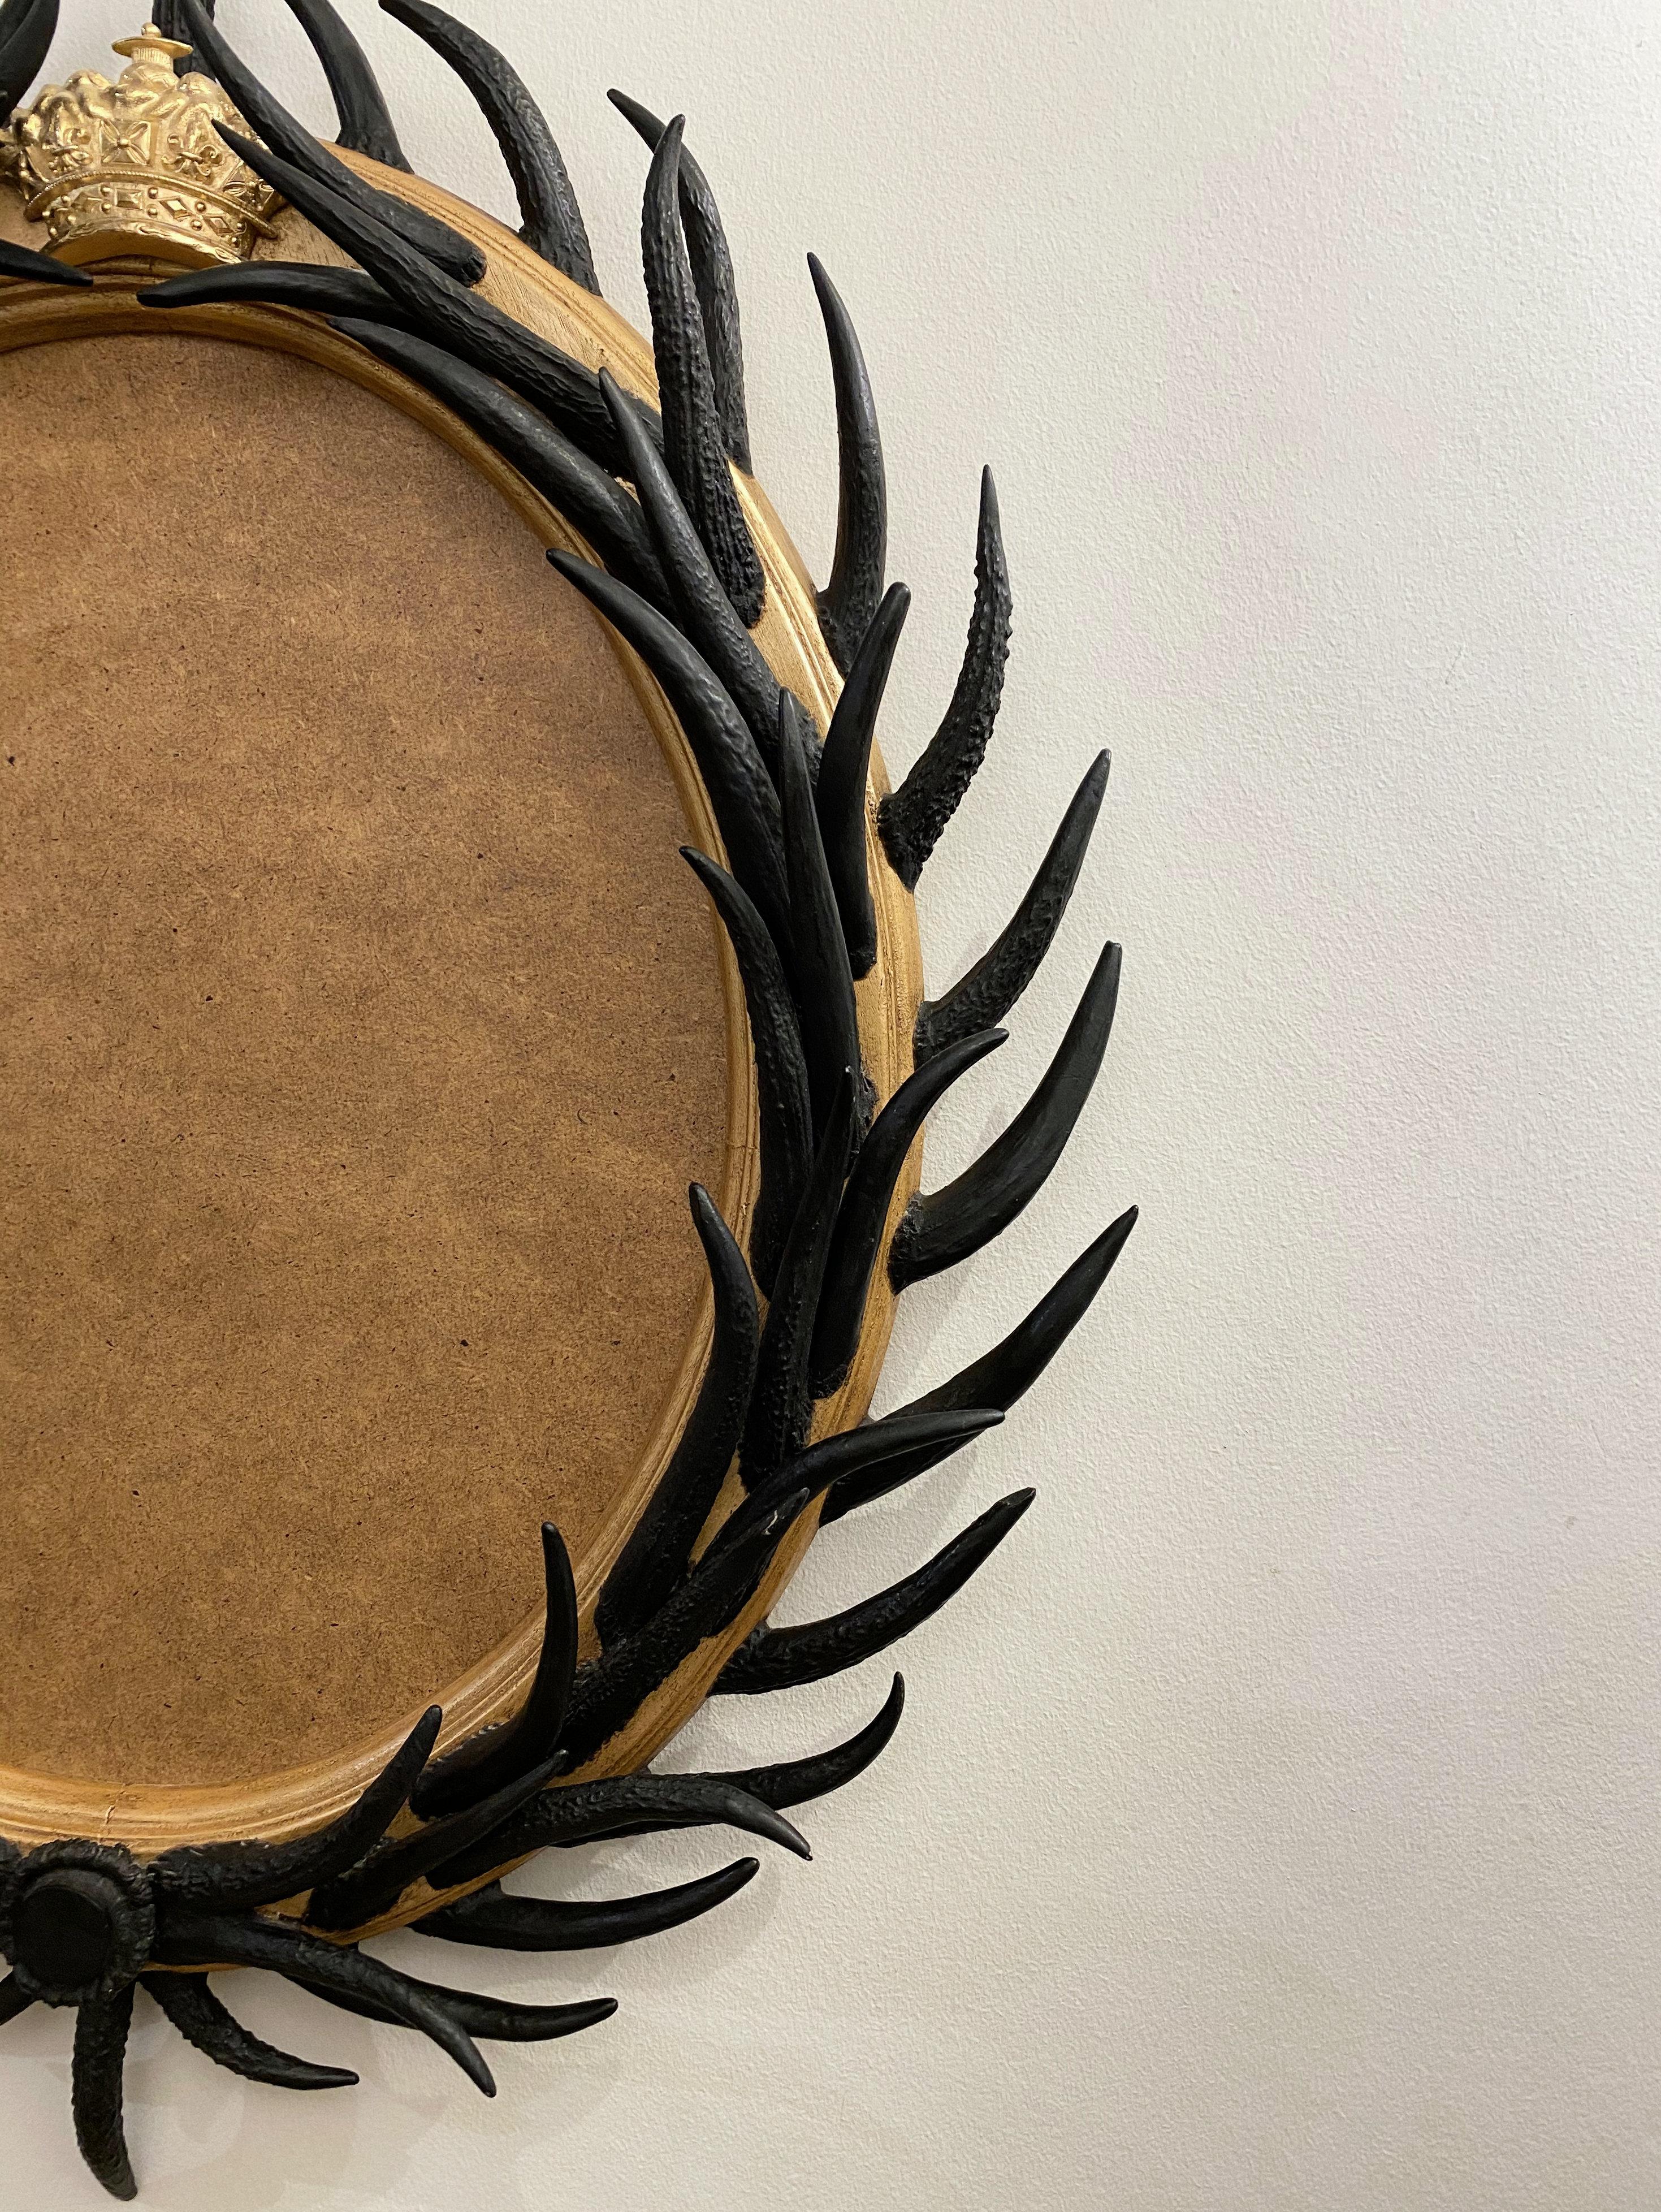 This stunning and original design oval wall mirror is comprised of naturally shed large red deer from Scotland. The individual natural beauty of the antler horn combined with the functionality and artistic design of the wall mirror makes this